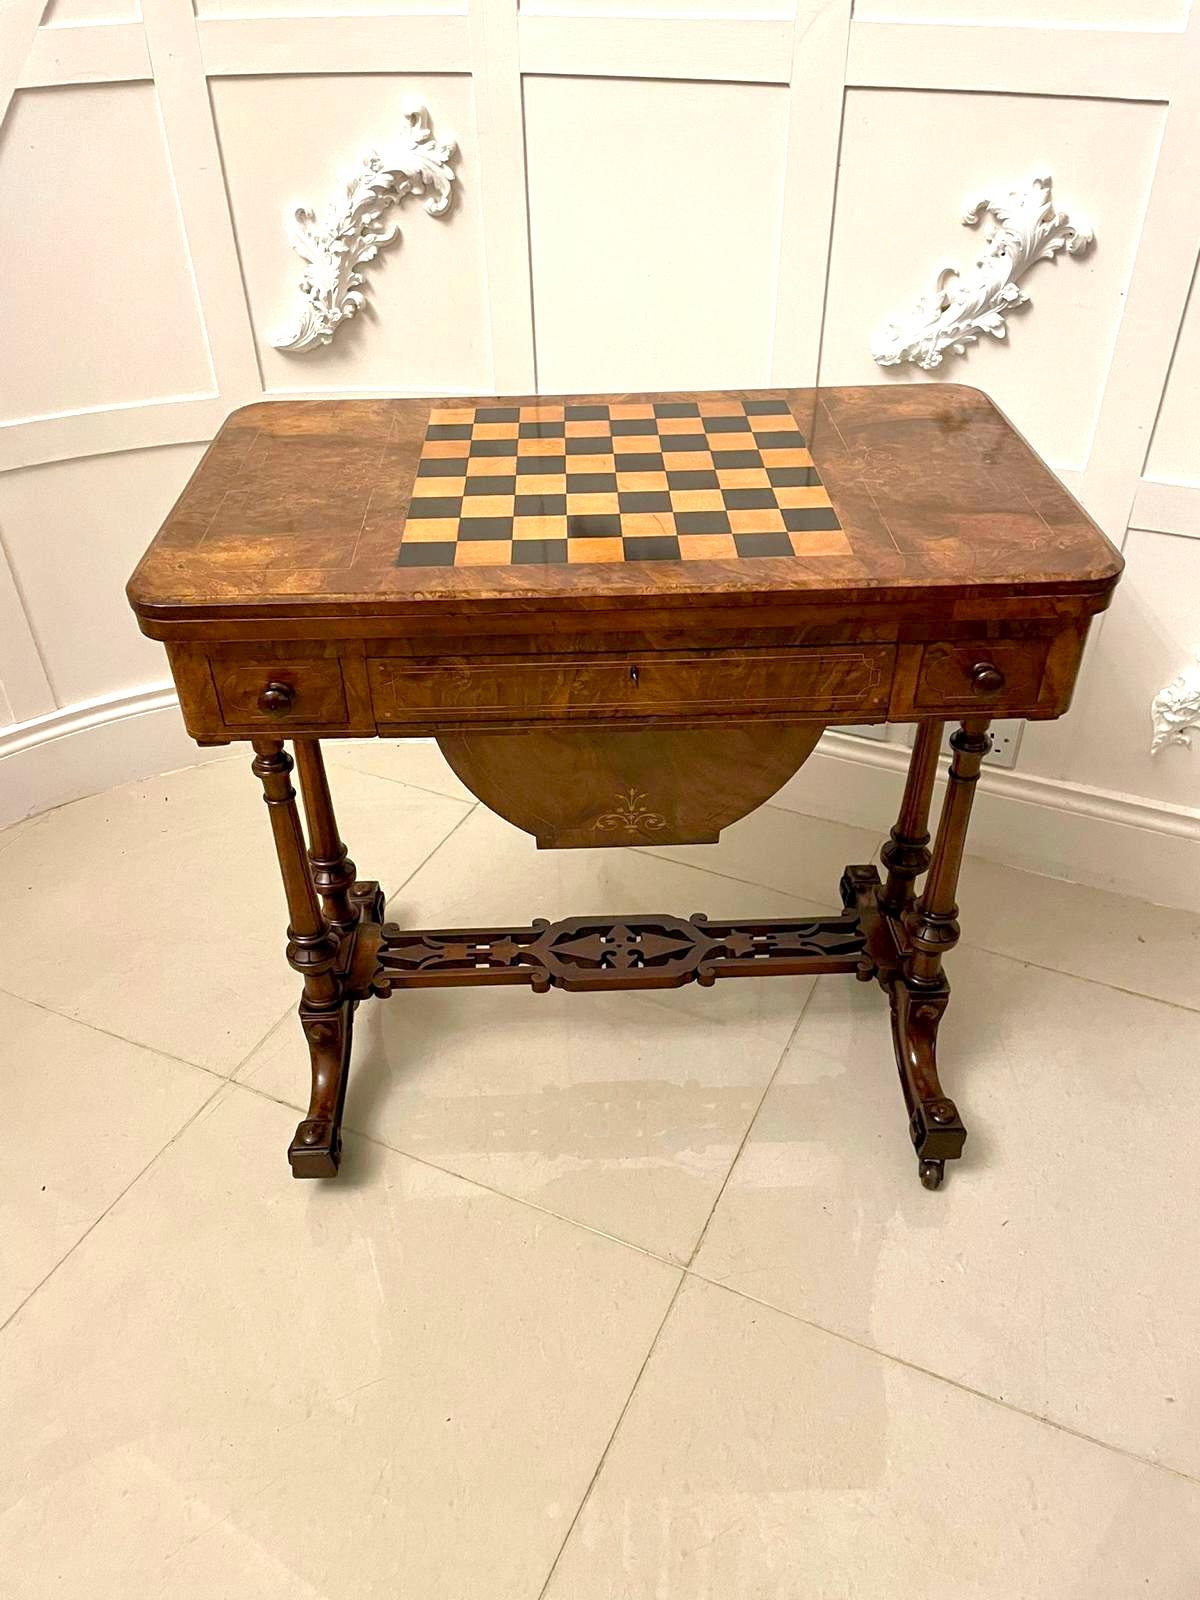 Fine Quality Antique Victorian Burr Walnut Inlaid Games Table In Good Condition For Sale In Suffolk, GB